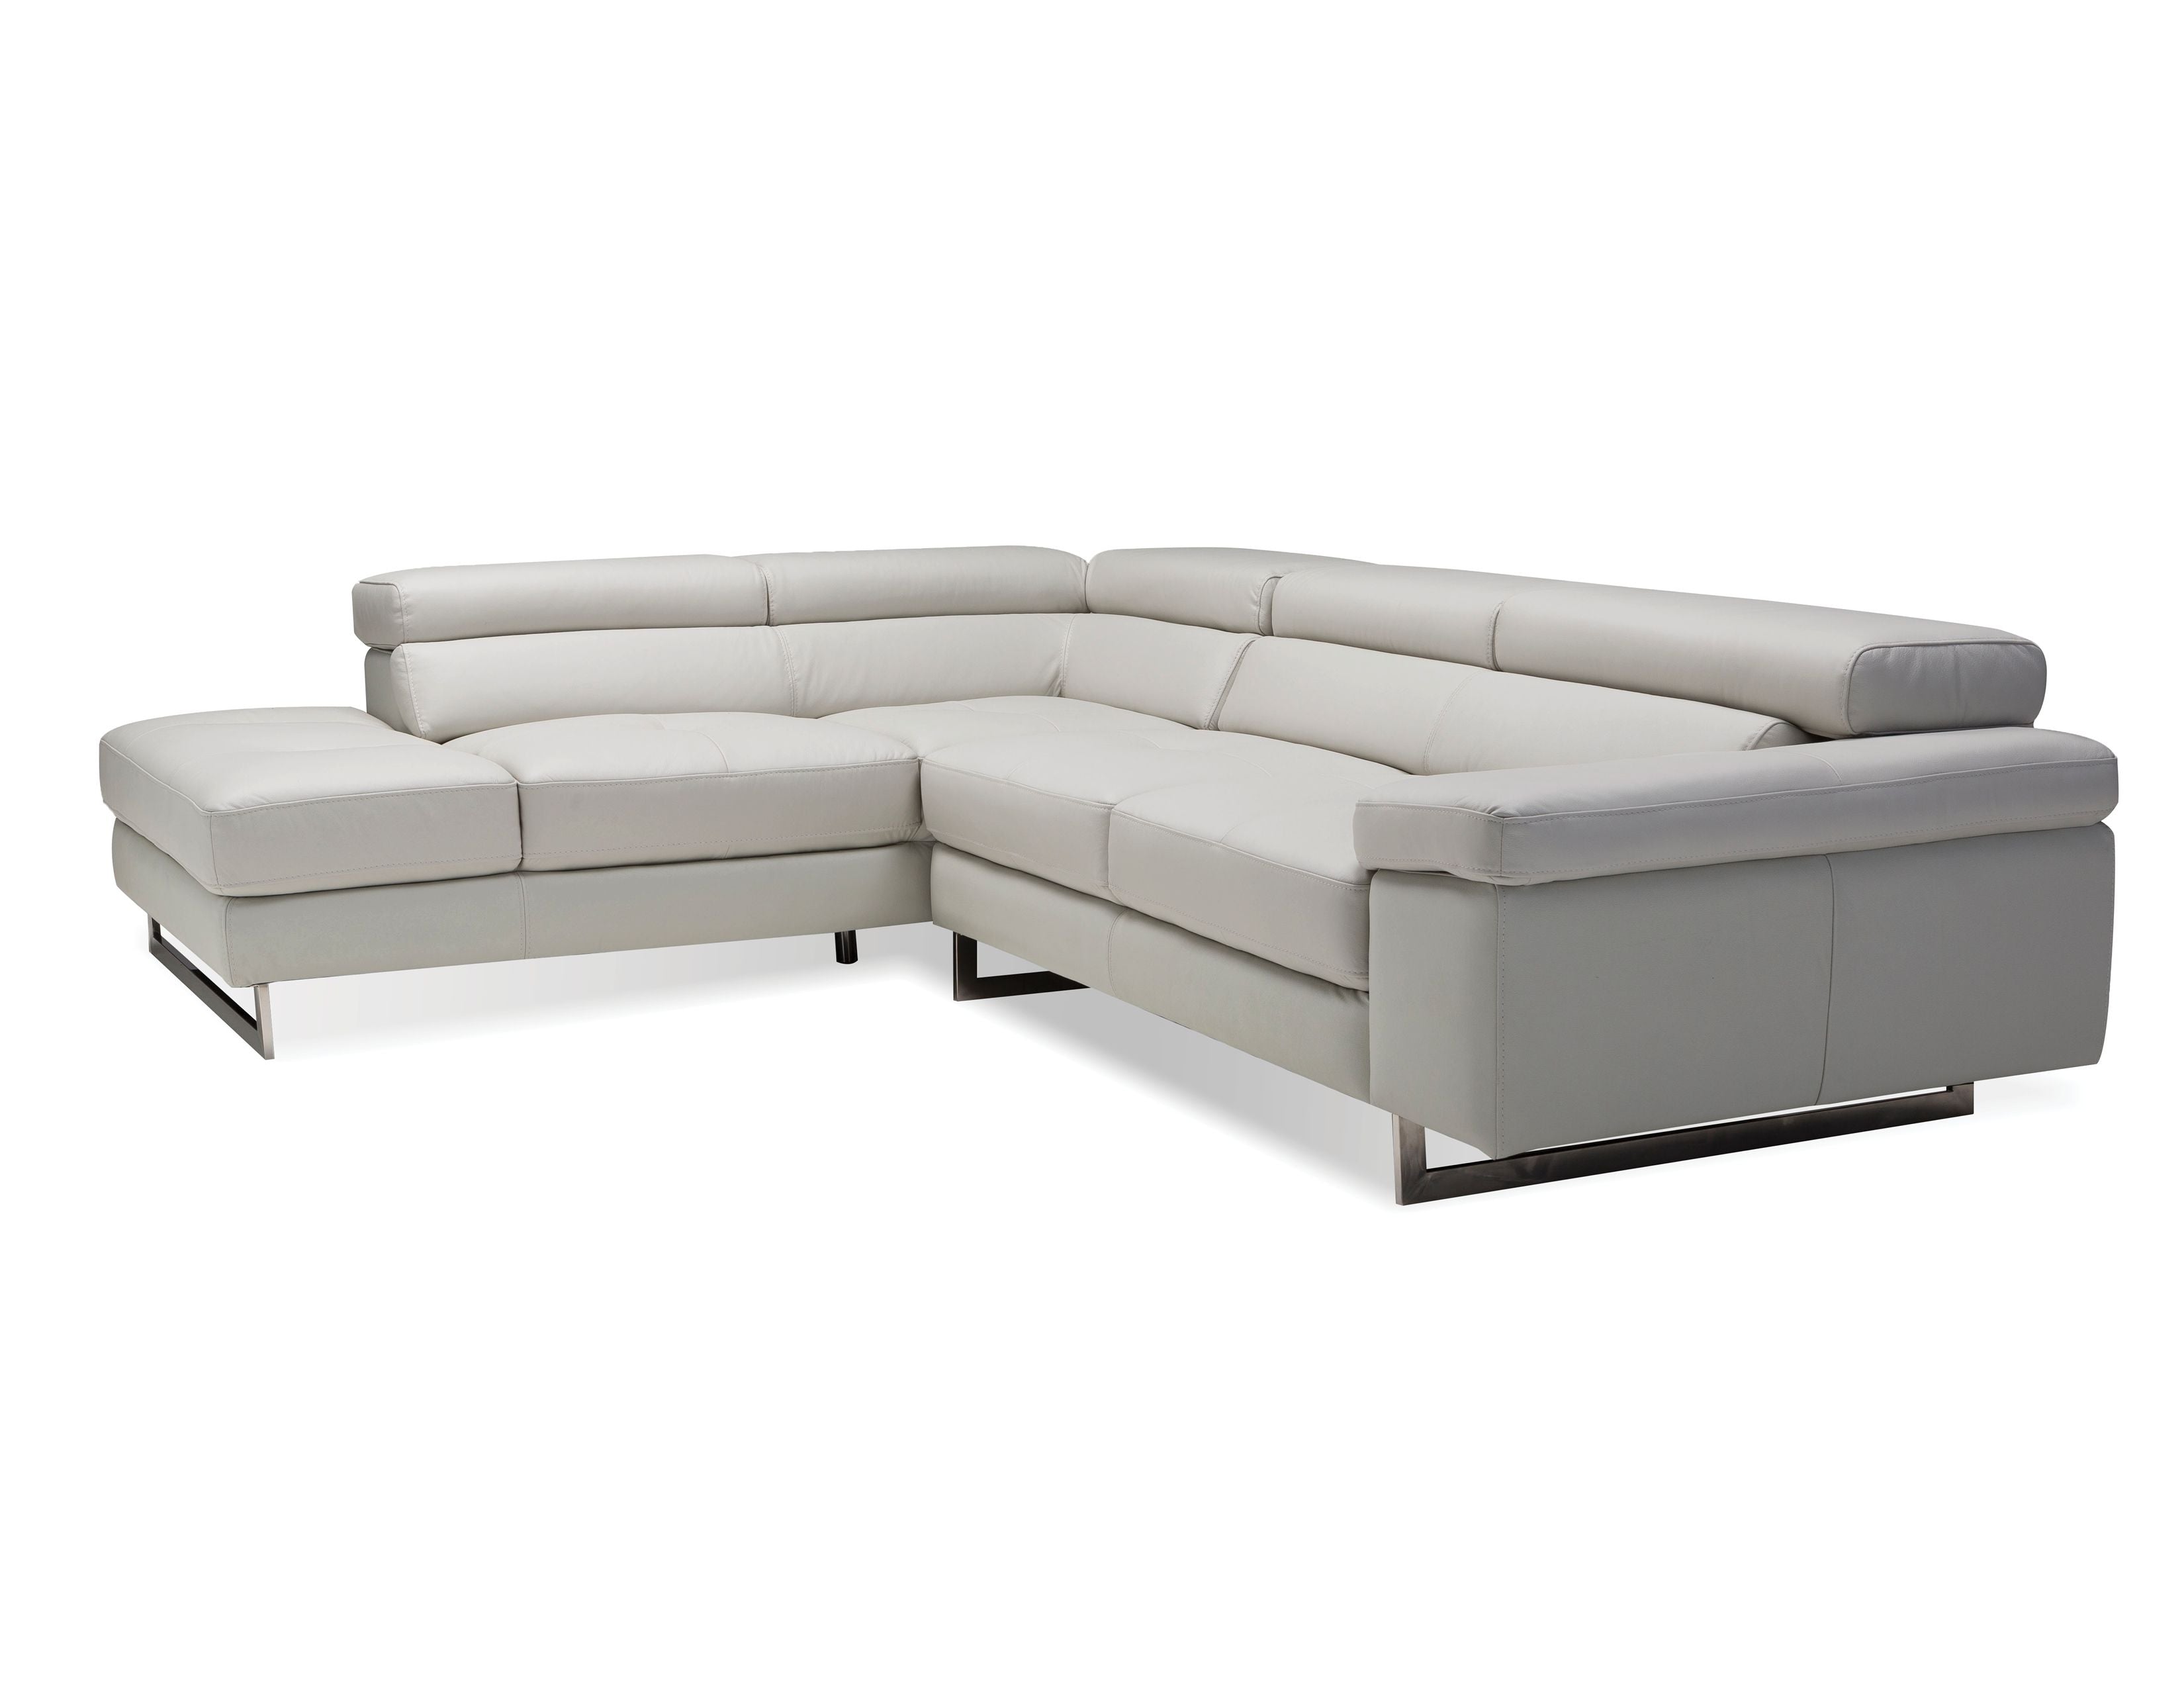 SYNCRO Leather Sectional in Titanium Grey